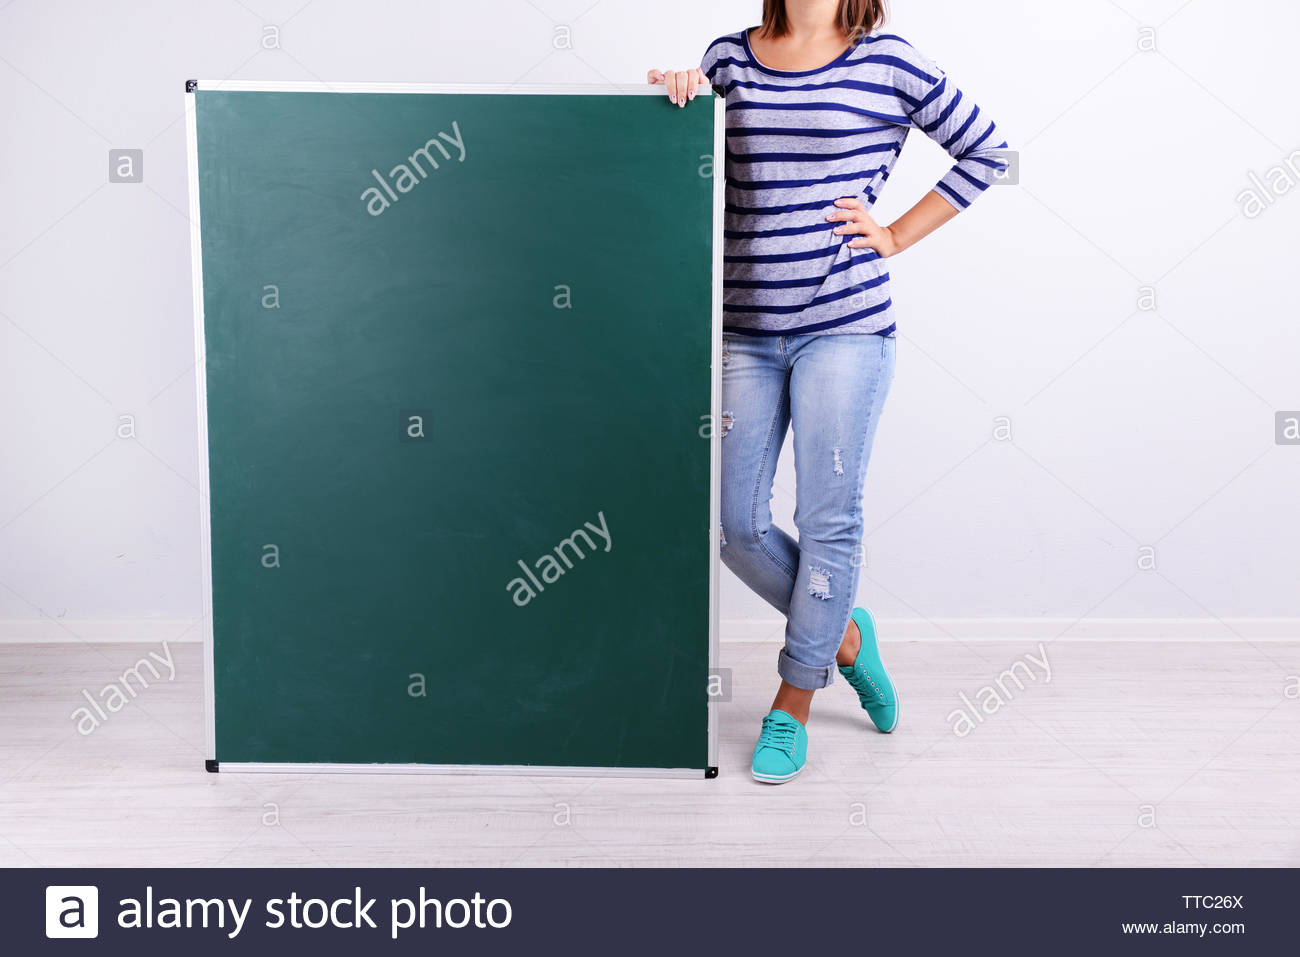 Woman In Causal With Green Blackboard On Grey Background Close Up